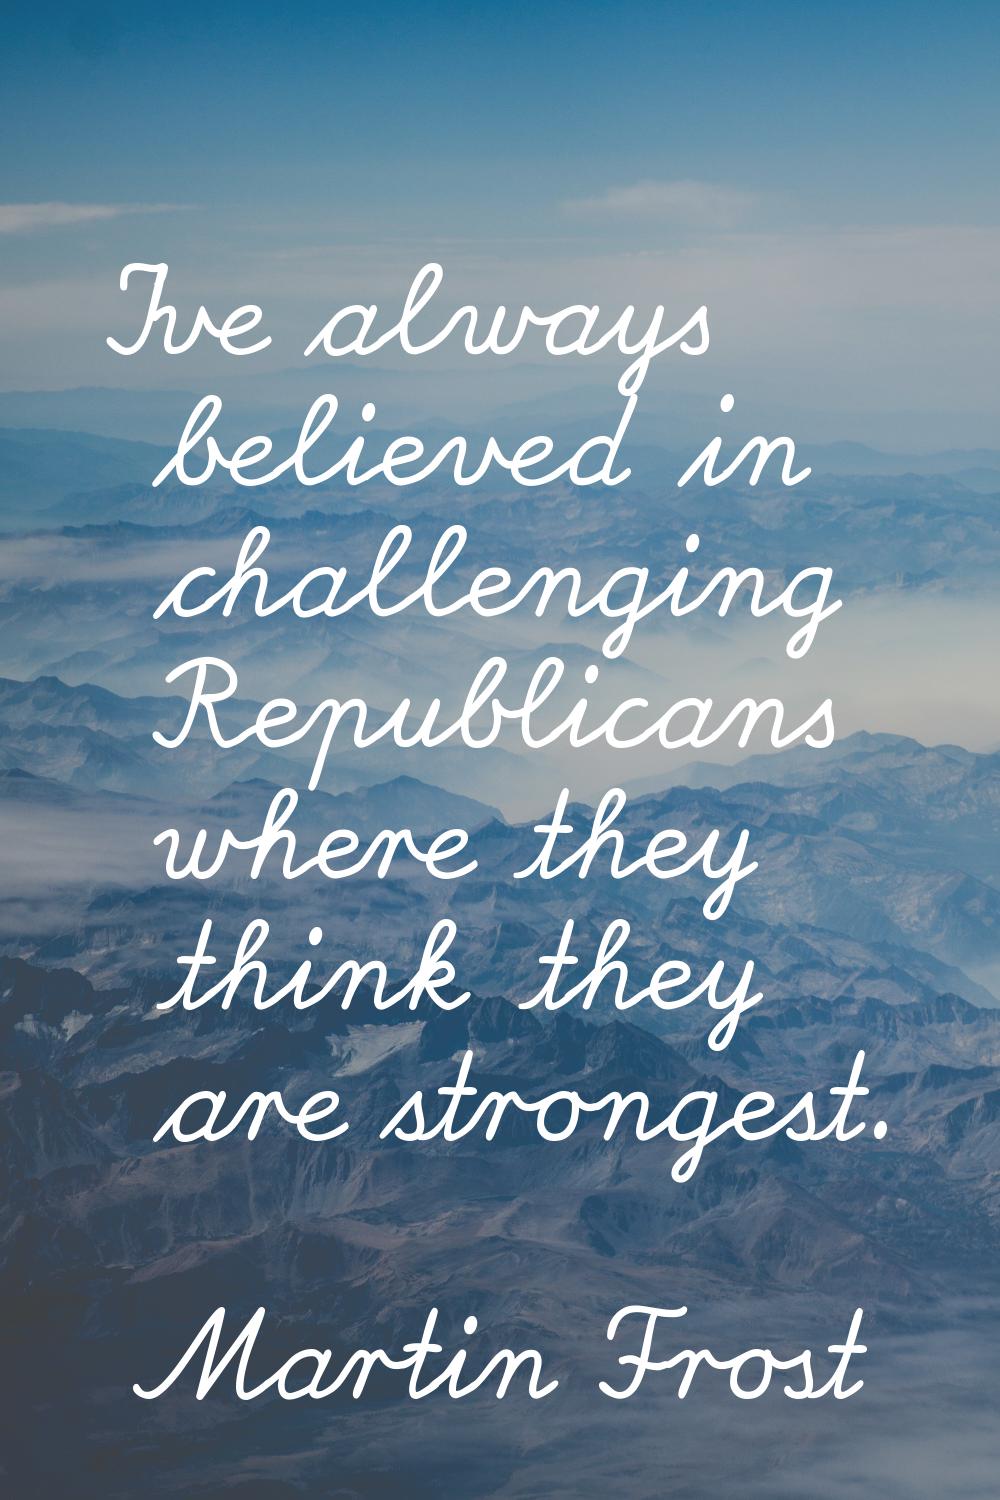 I've always believed in challenging Republicans where they think they are strongest.